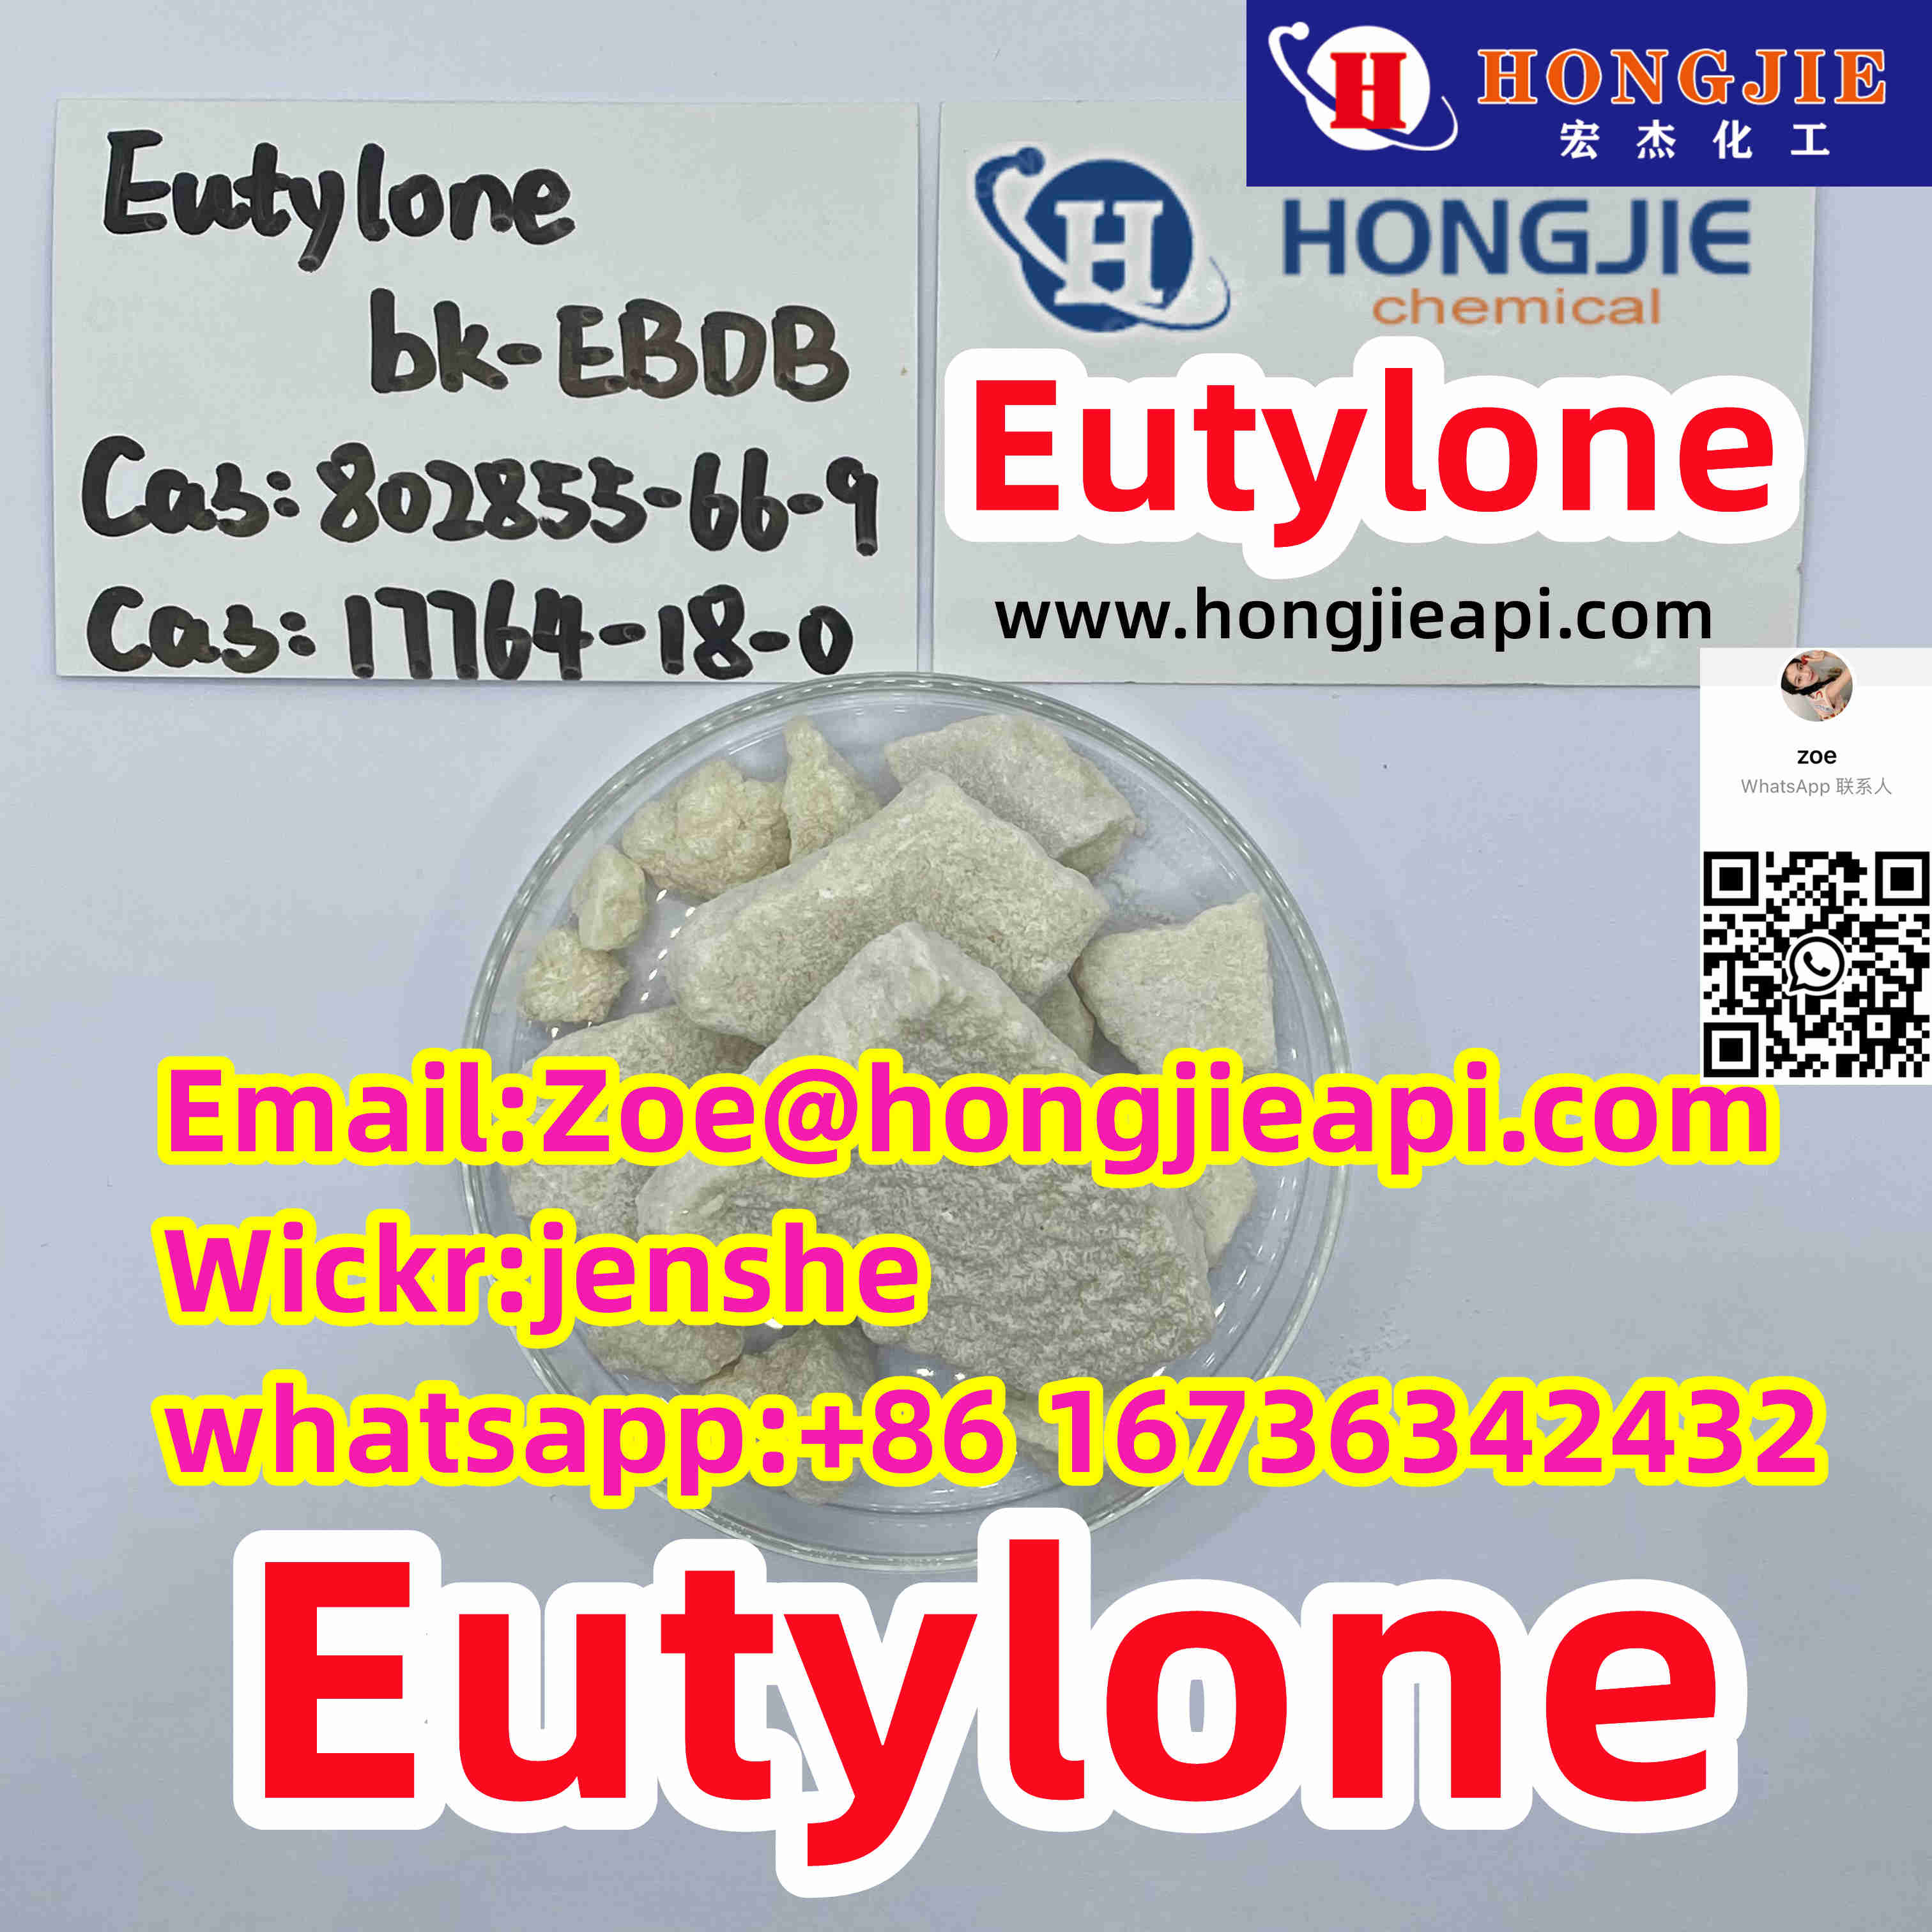 CAS 802855-66-9 Eutylone chinese manufactures